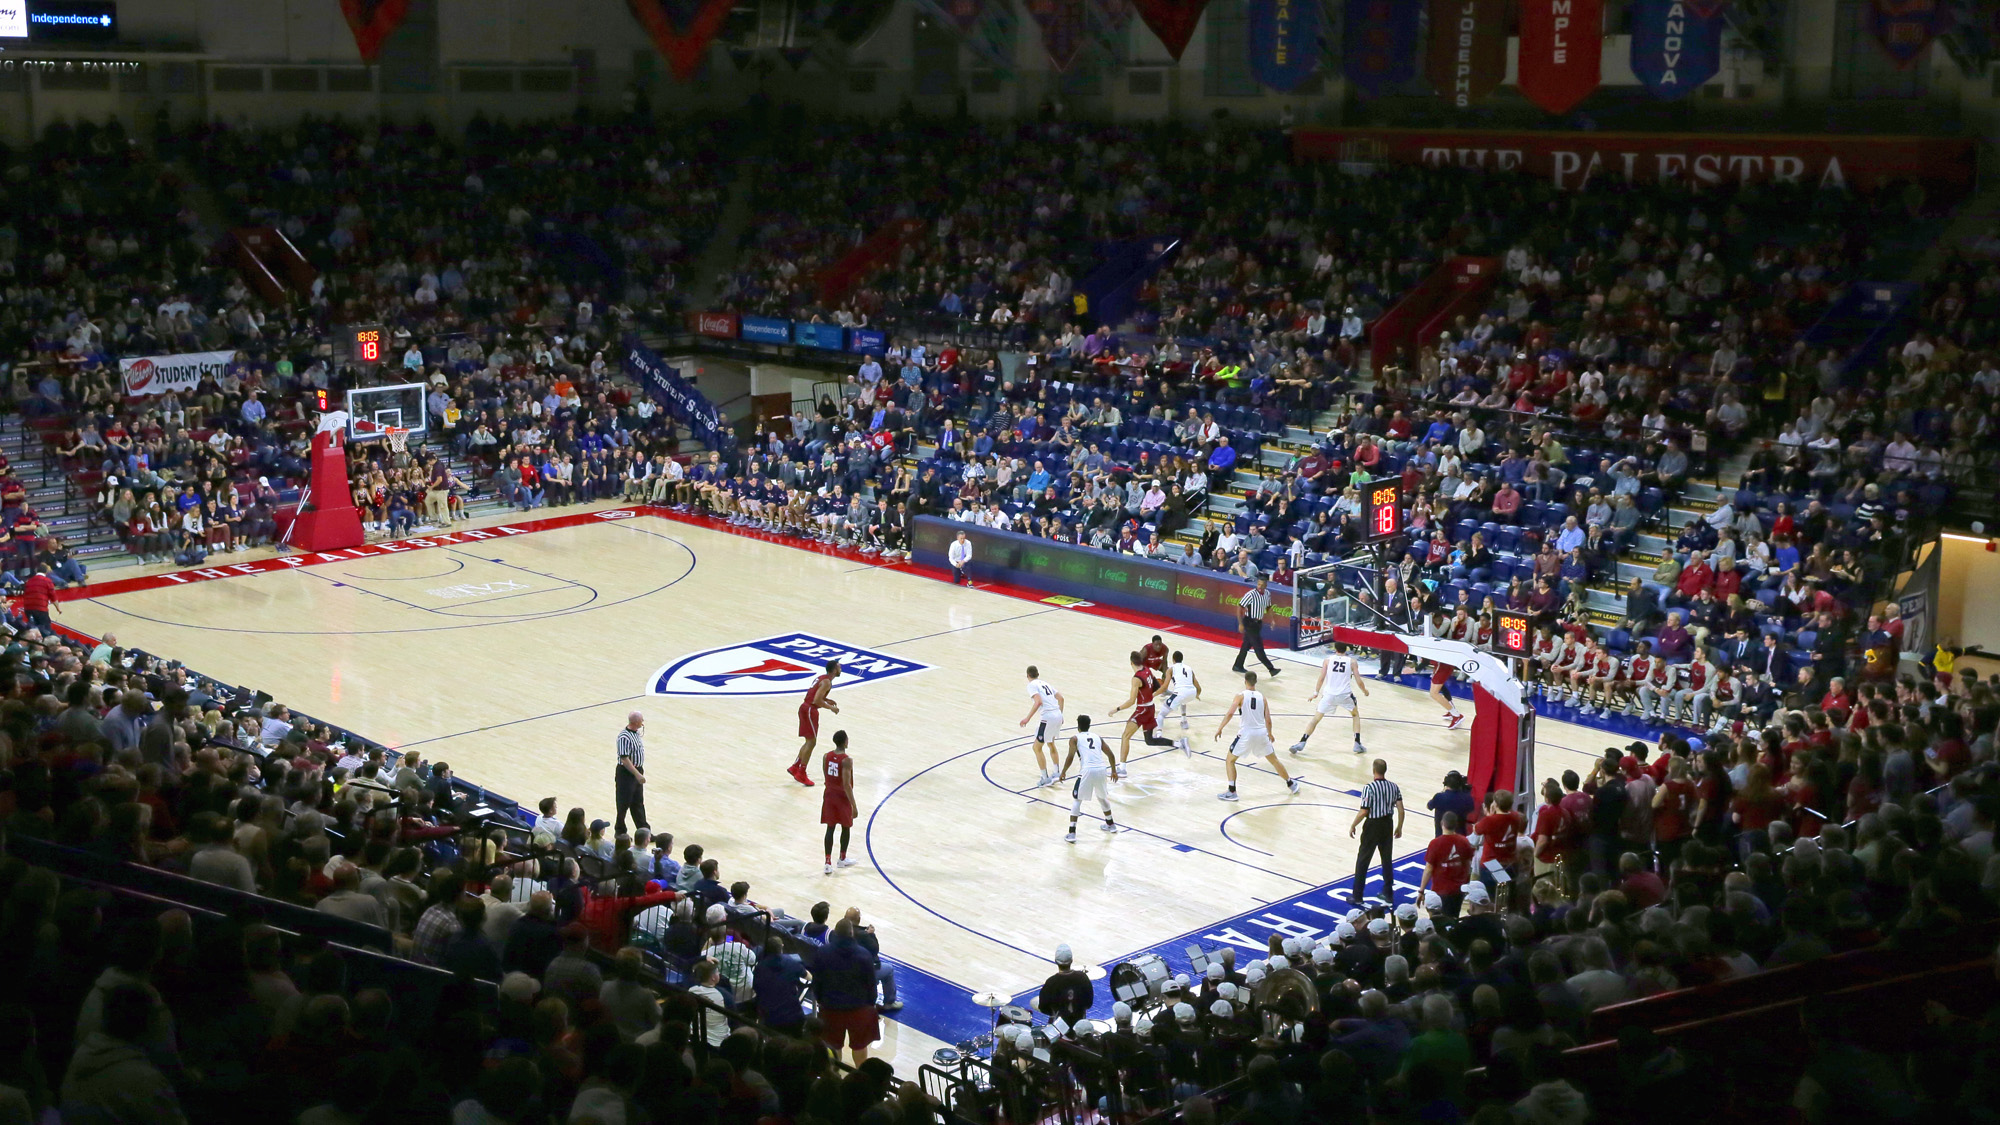 Penn's men's basketball team plays a home game at the Palestra in front of a packed crowd.